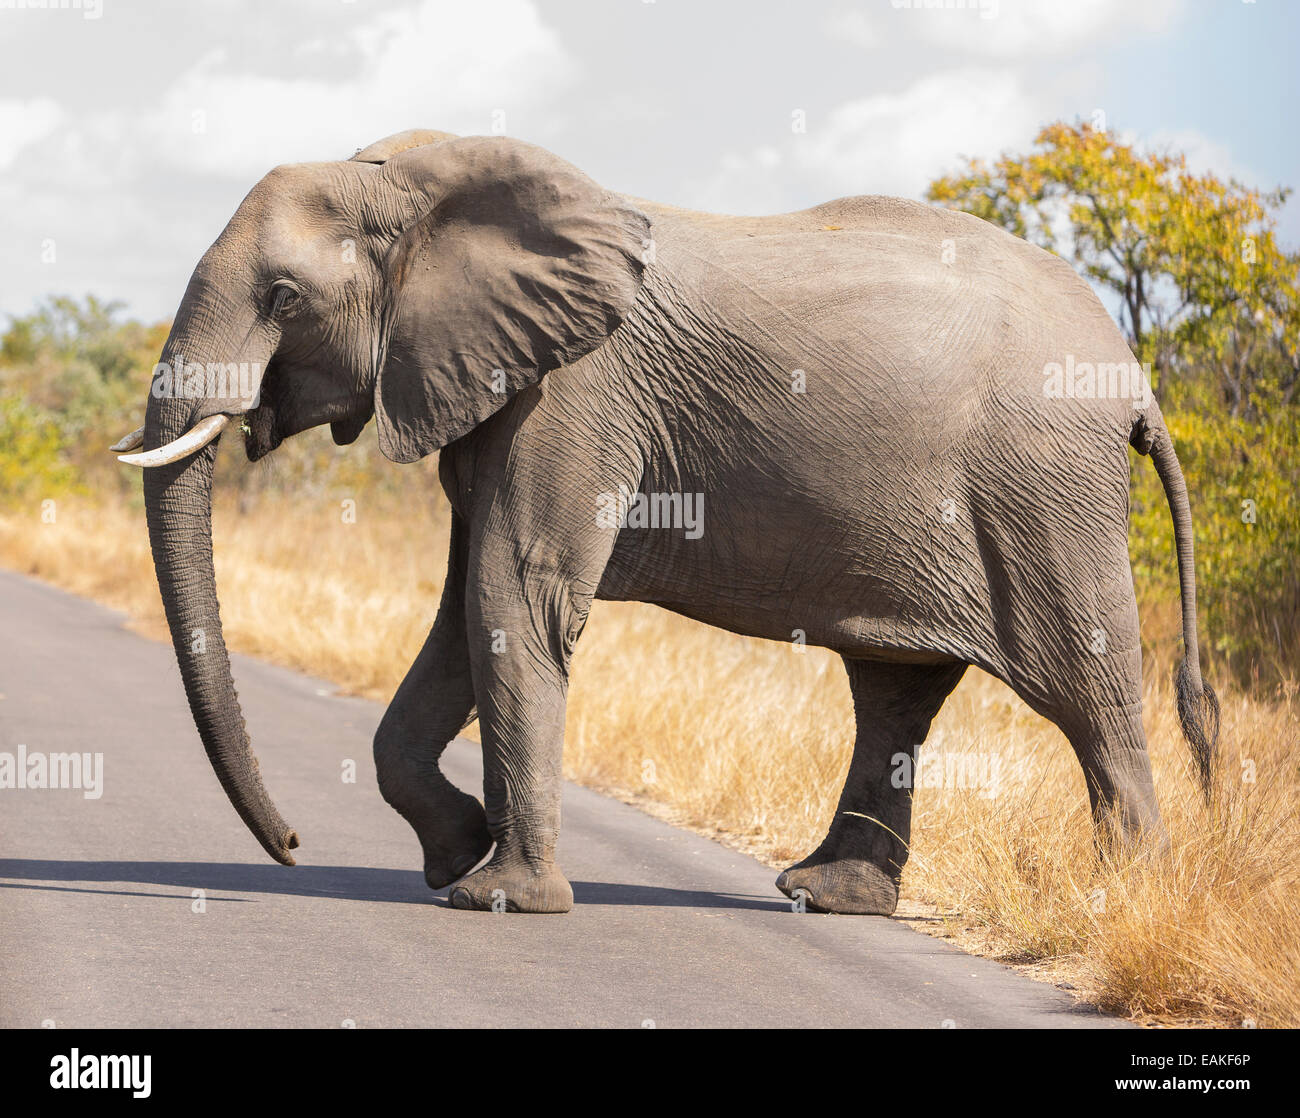 KRUGER NATIONAL PARK, SOUTH AFRICA - Elephant crossing the road Stock Photo